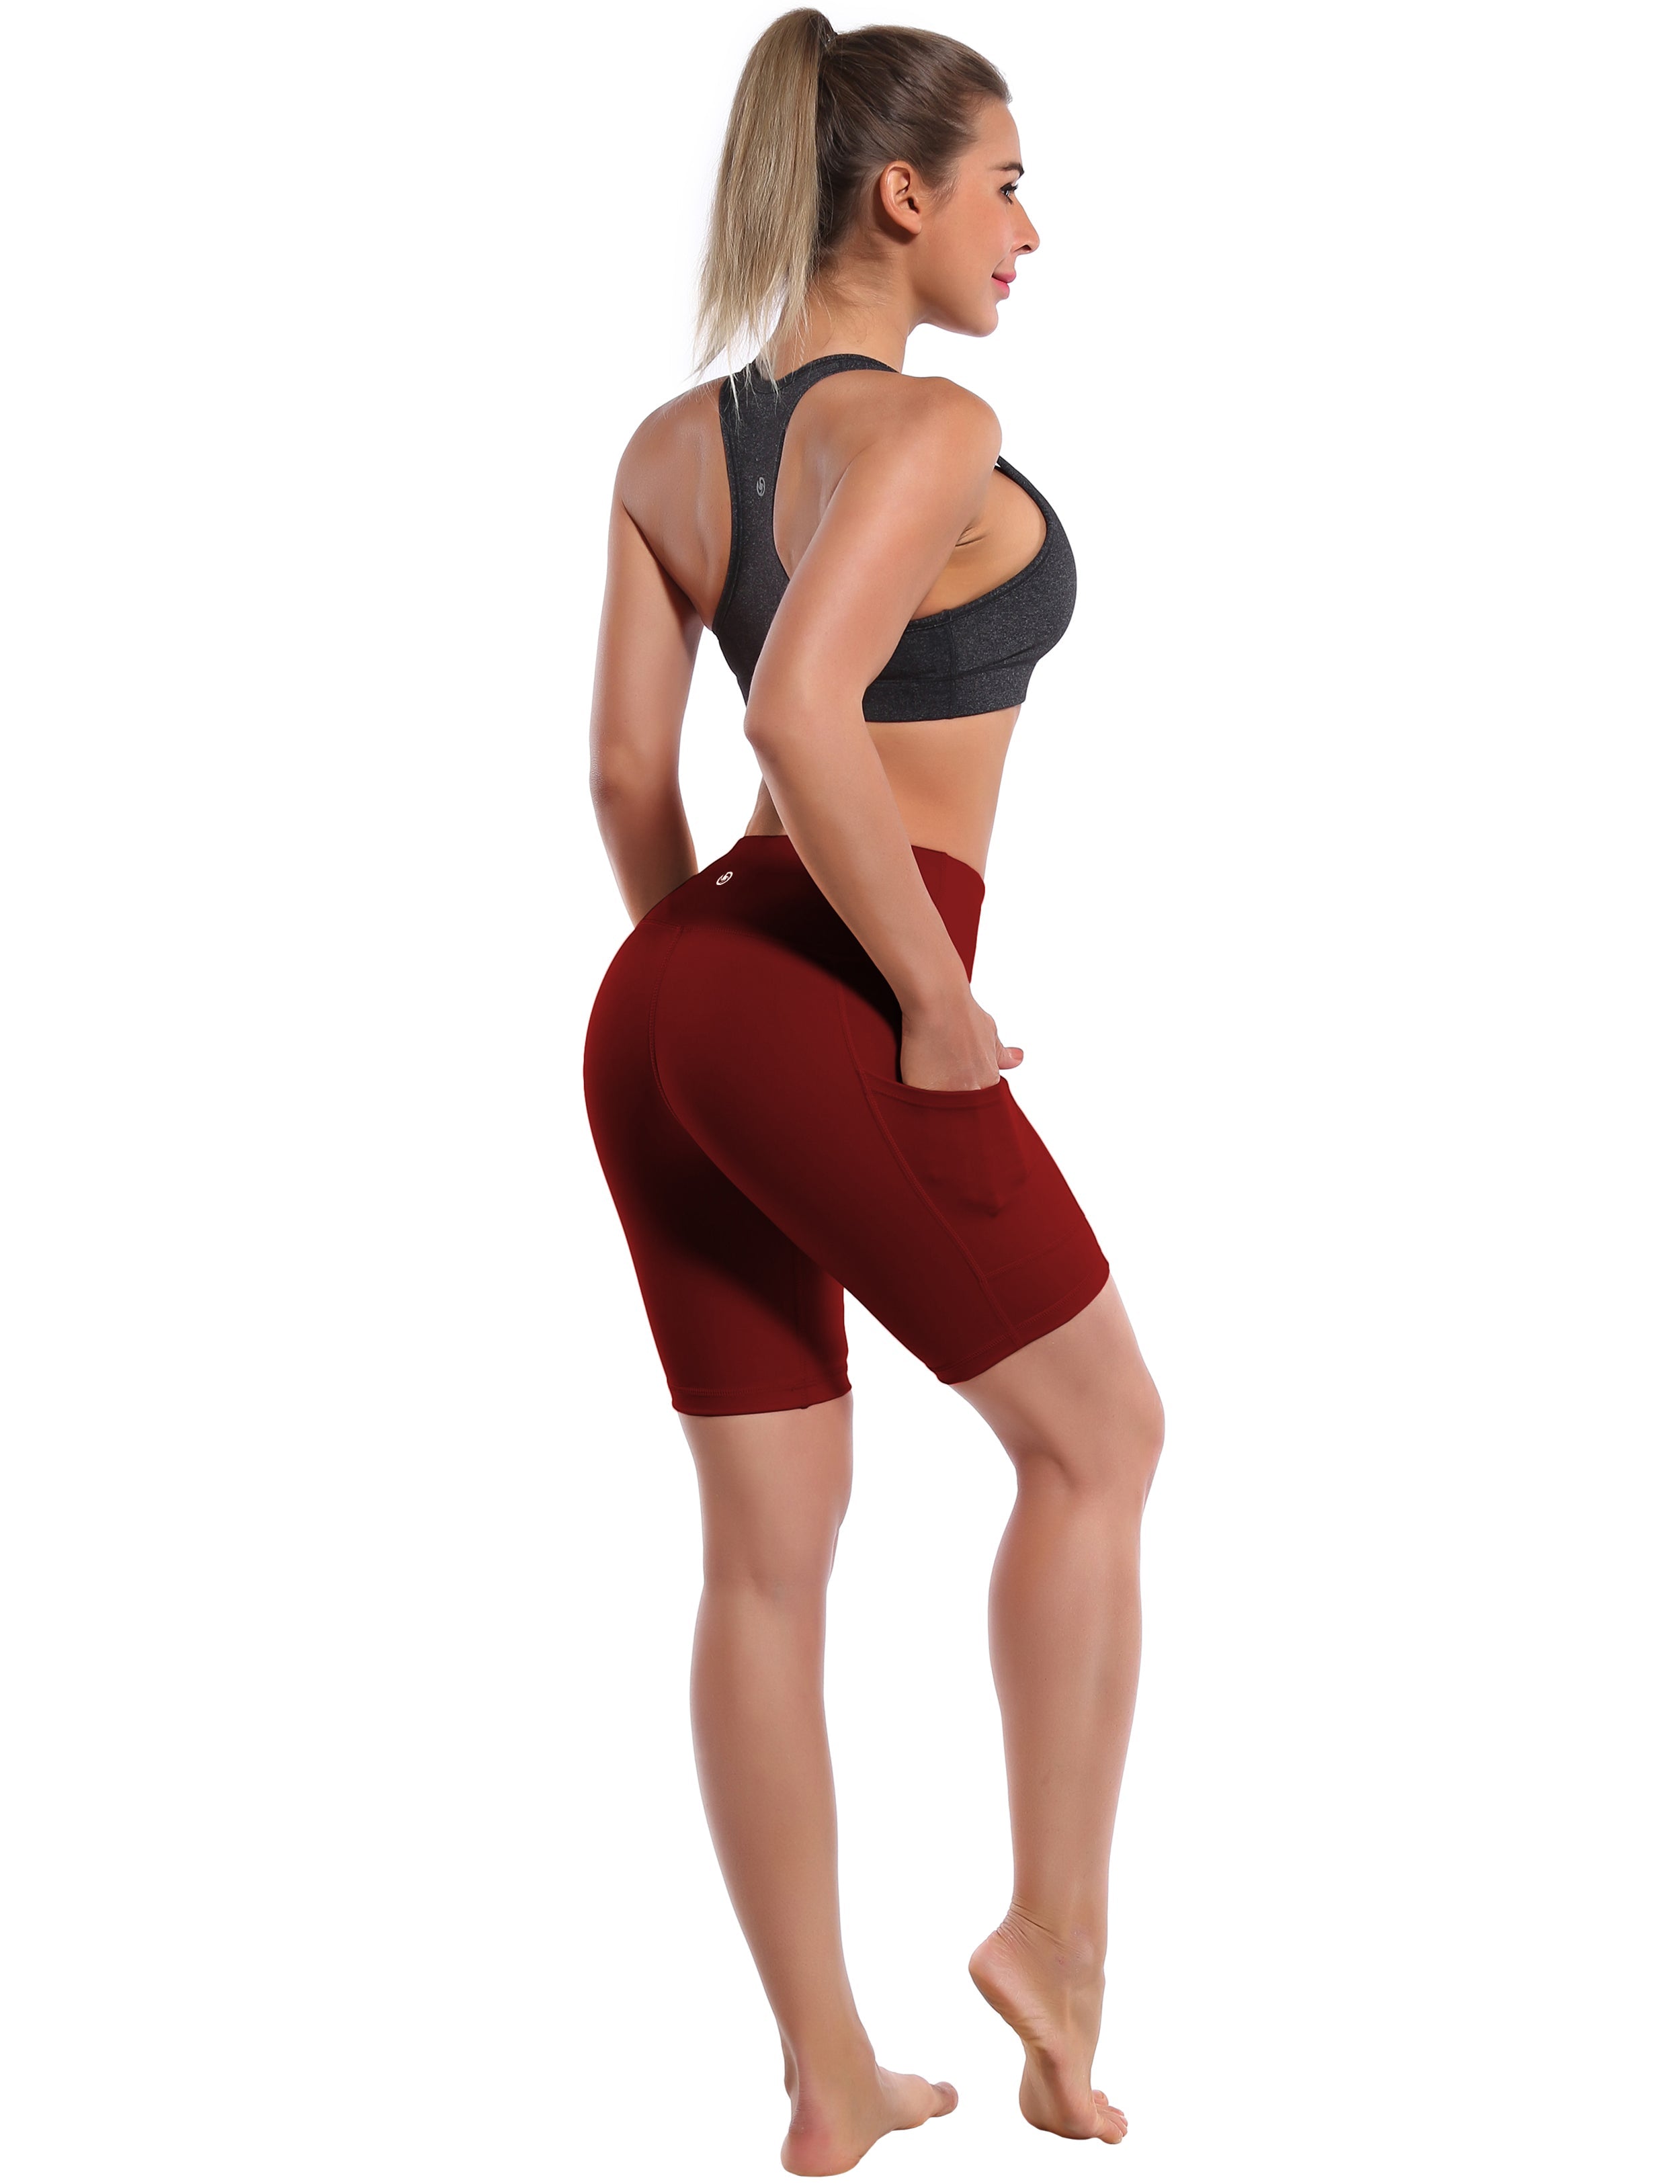 8" Side Pockets Golf Shorts cherryred Sleek, soft, smooth and totally comfortable: our newest style is here. Softest-ever fabric High elasticity High density 4-way stretch Fabric doesn't attract lint easily No see-through Moisture-wicking Machine wash 75% Nylon, 25% Spandex